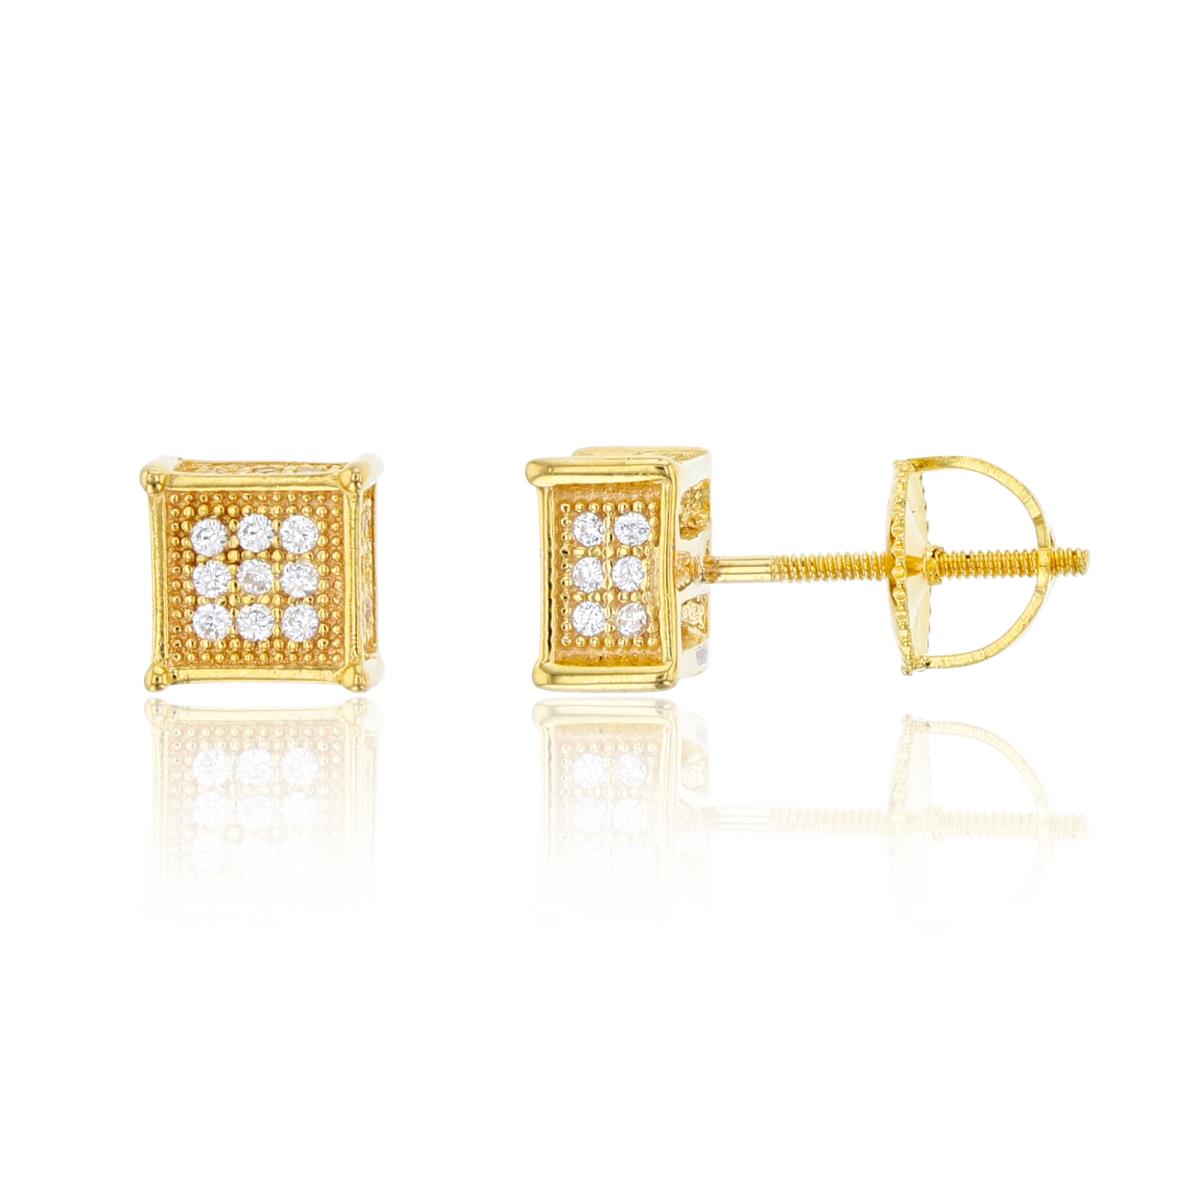 Sterling Silver Yellow 3x3 Square Screwback Stud